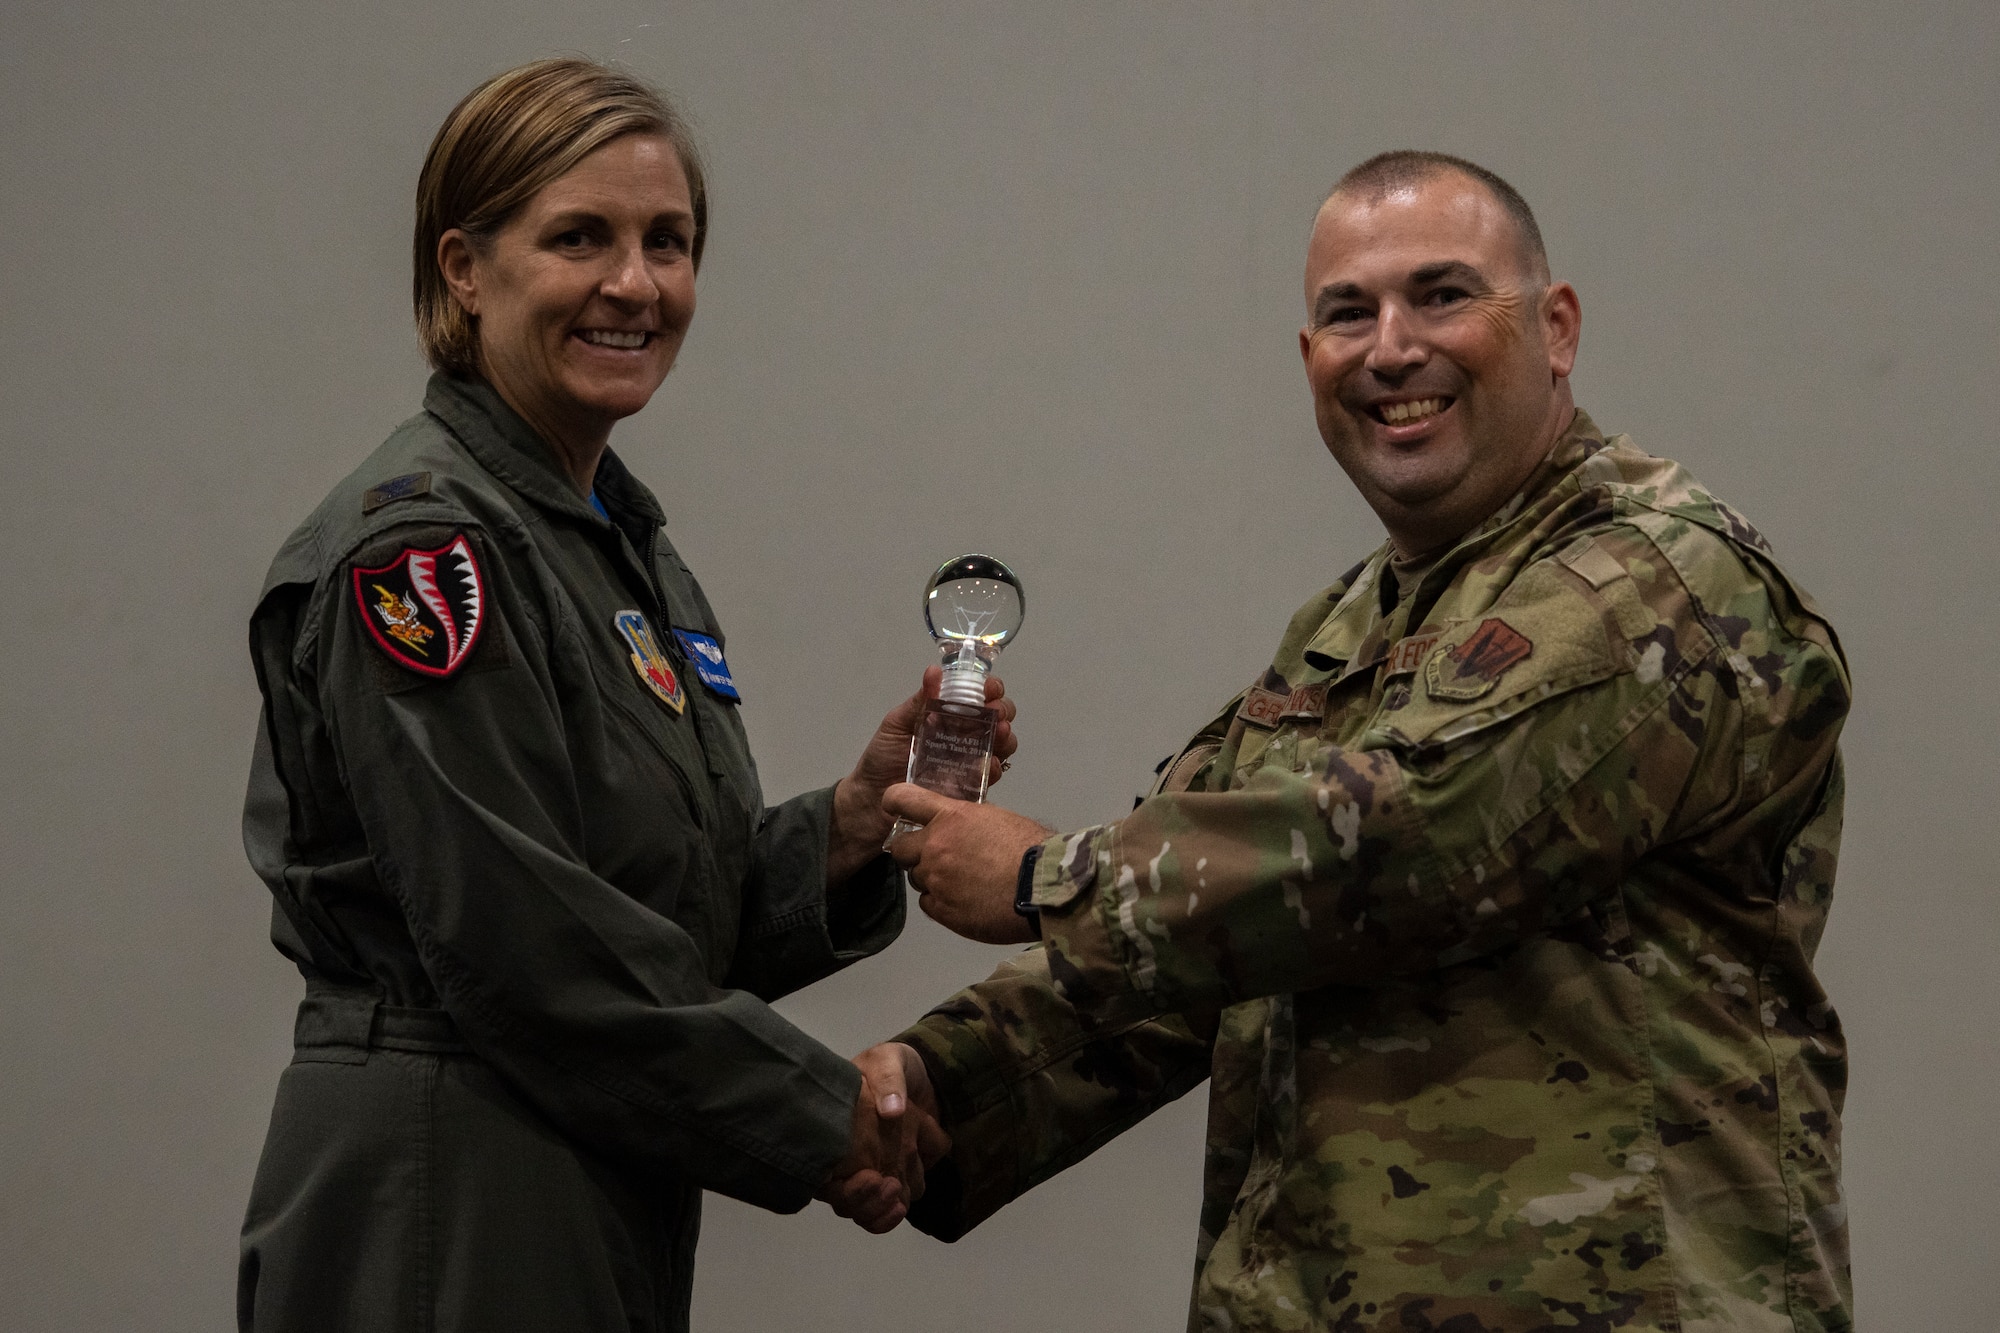 Col. Jennifer Short (left), 23d Wing commander, presents Tech. Sgt. Kevin Grabowsky from team 'Motorola Wave' with the second place trophy May, 3, 2019, at Moody Air Force Base, Ga.  The 'Motorola Wave' team pitched an idea that would increase land mobile radio capabilities on Moody. This idea received funding and support from Moody. (U.S. Air Force photo by Airman 1st Class Joseph P. Leveille